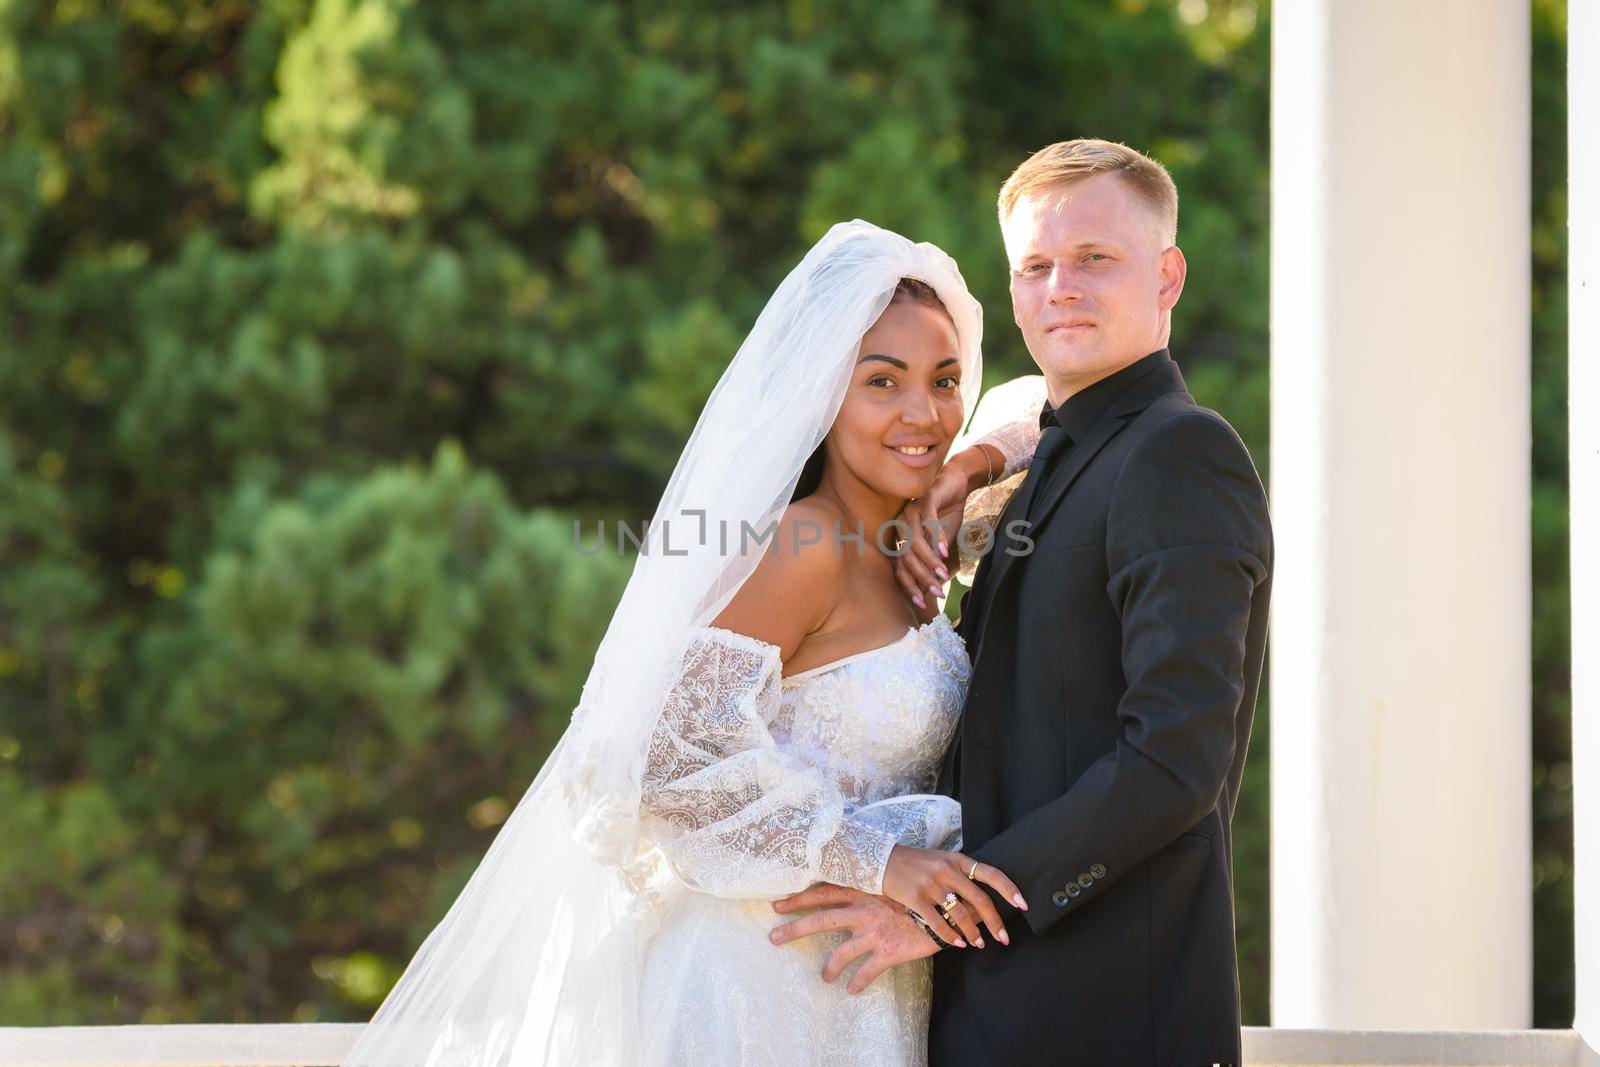 Mixed race newlyweds on a walk hugging and looking into the frame